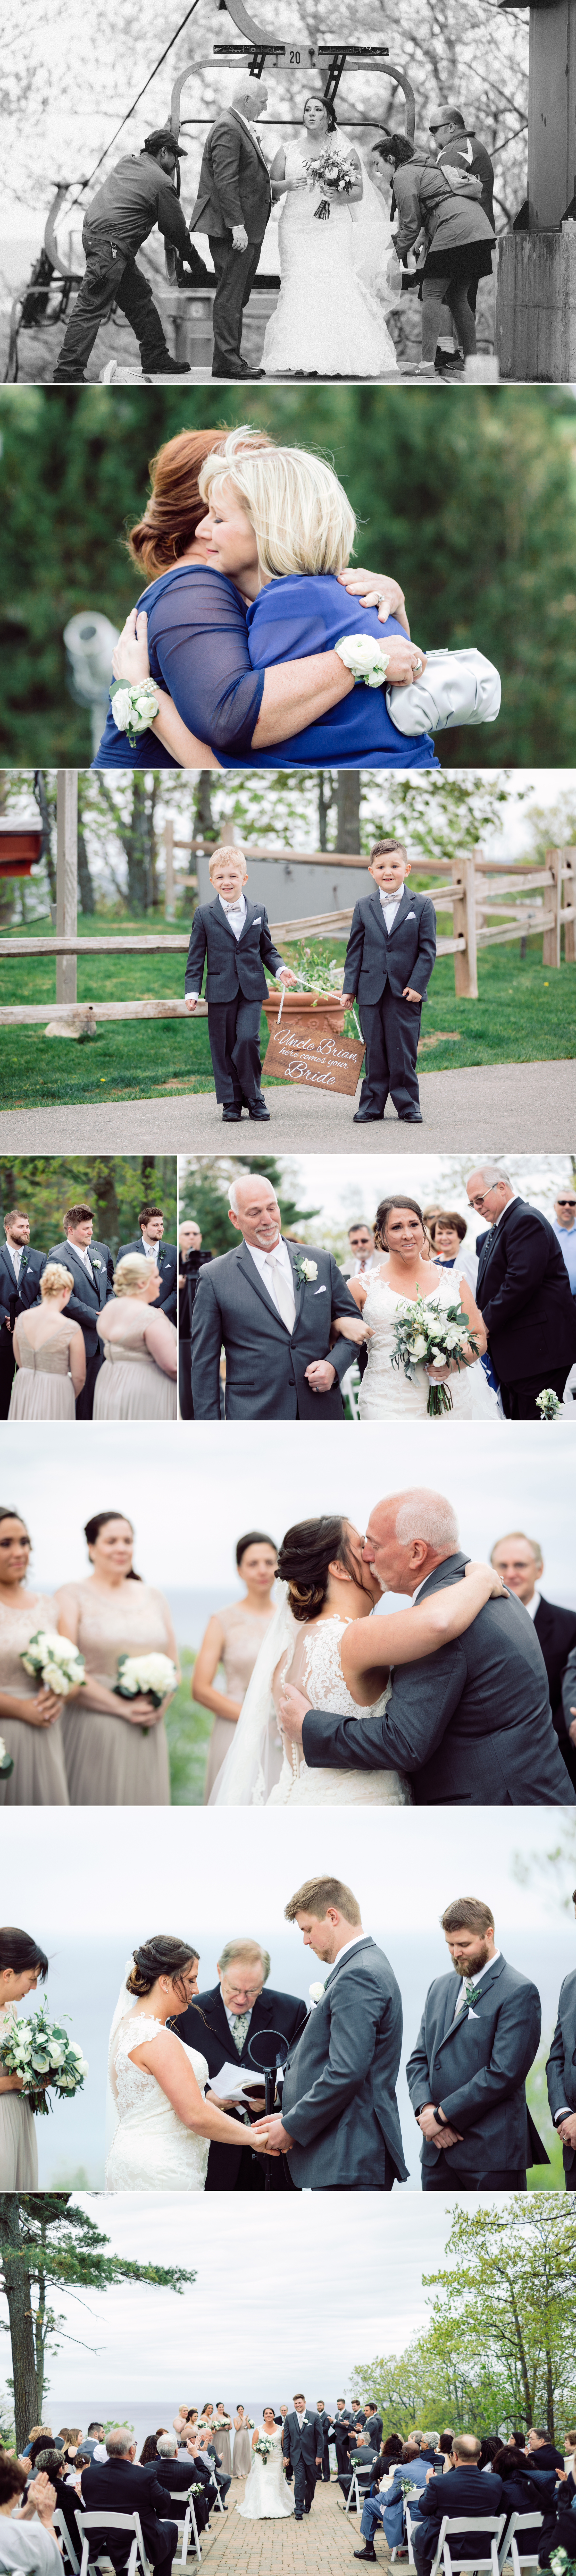 wedding ceremony on the hill at The Homestead Resort